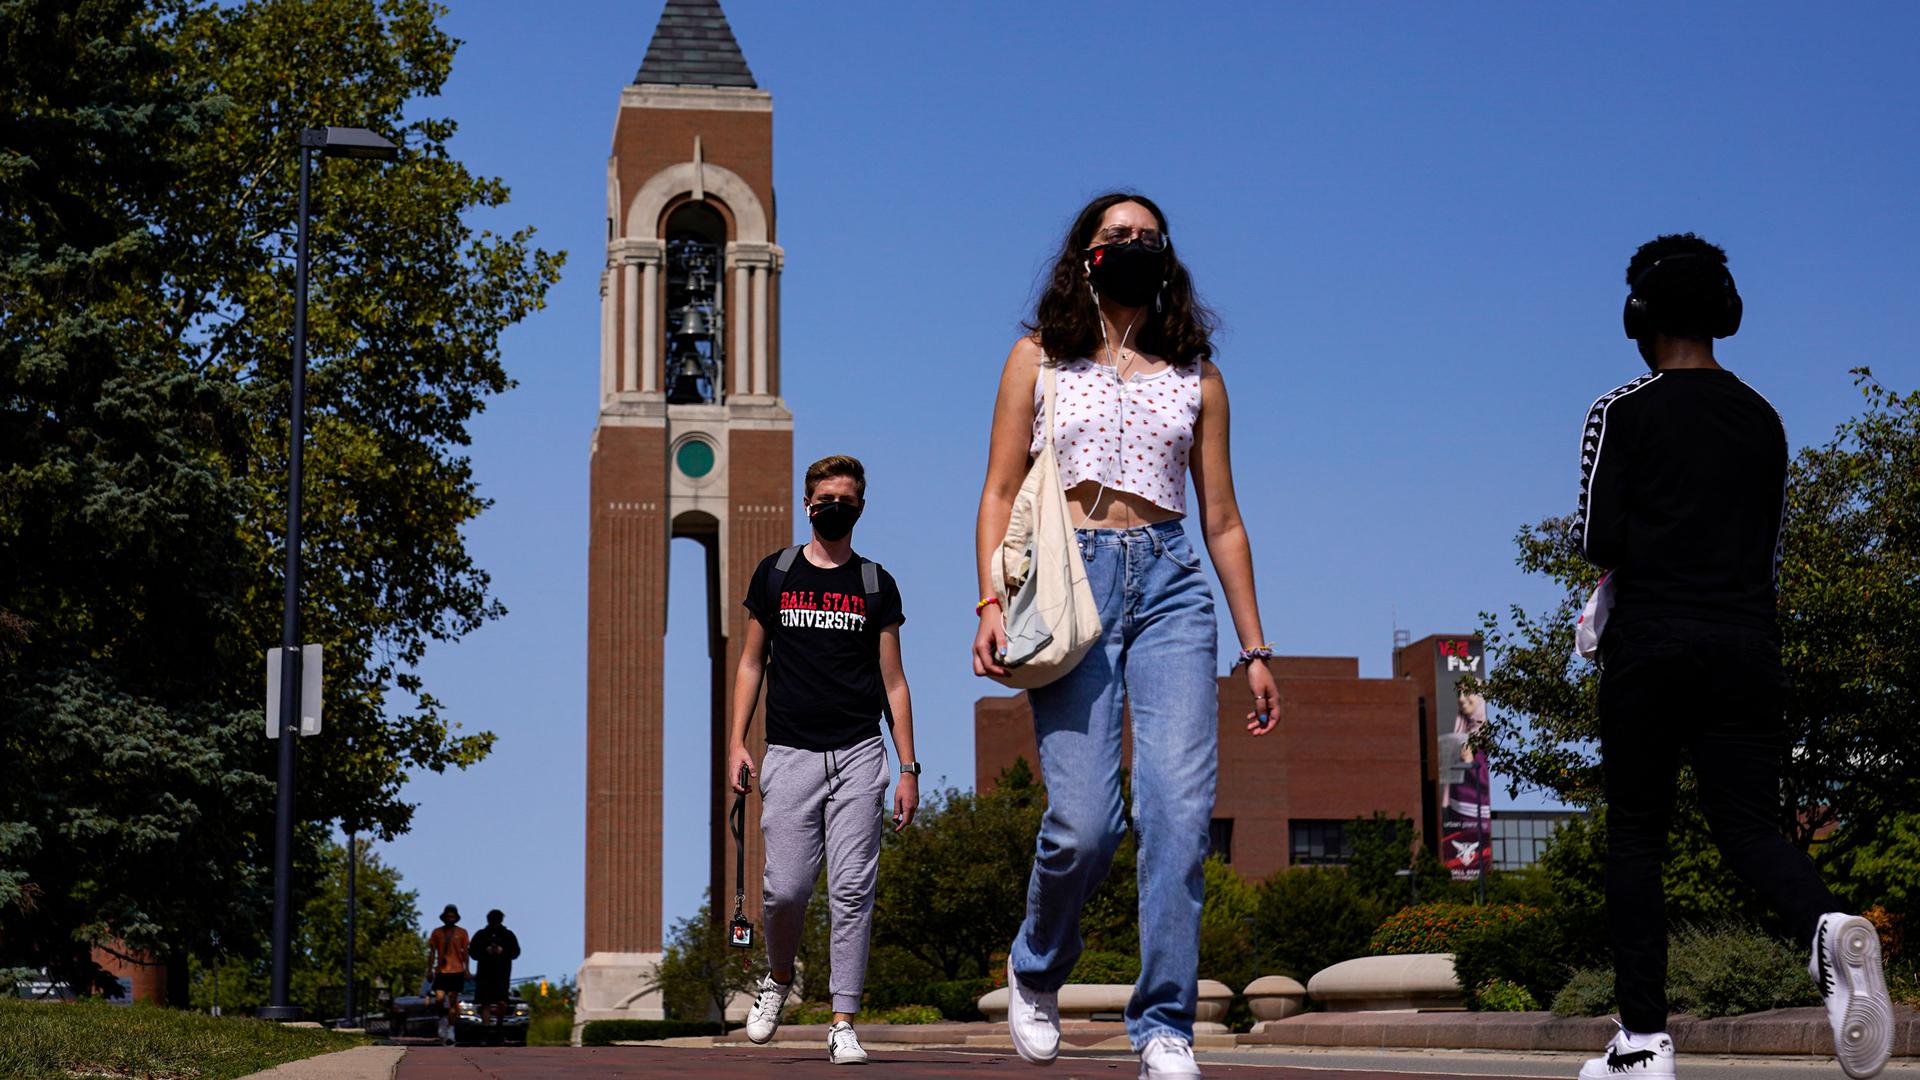 Several people are shown wearing face masks and walking on a college campus with a ornate brick tower in the distance.